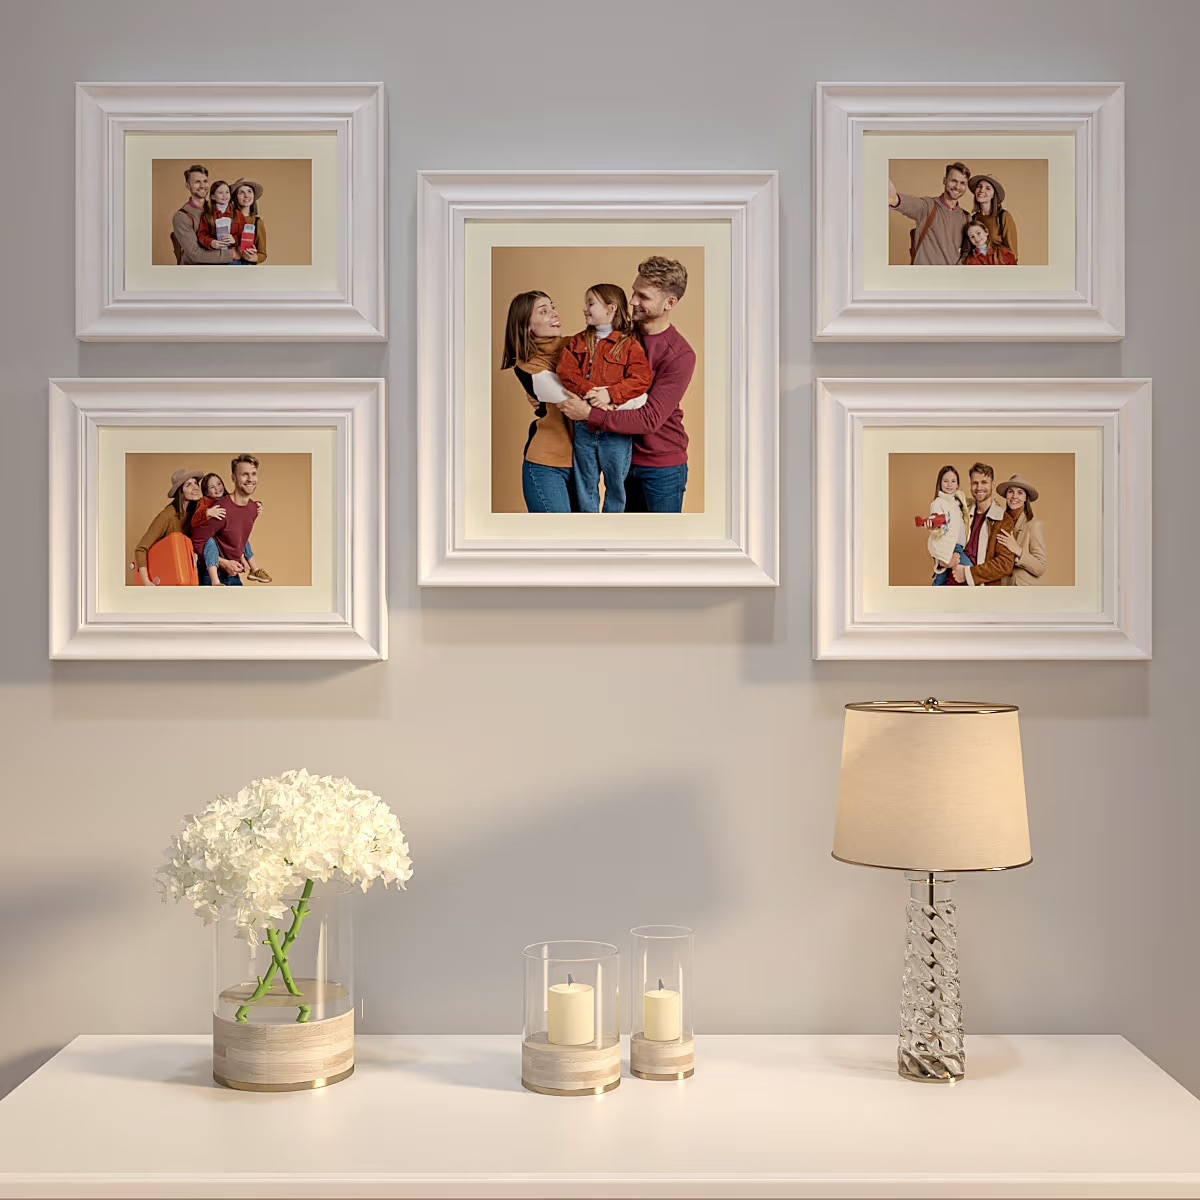 Icona Bay 6X4 Picture Frames (Black, 6 Pack), Sturdy Wood Composite Photo Frames 6 x 4, Sleek Design, Table Top or Wall Mount, Exclusives Collection